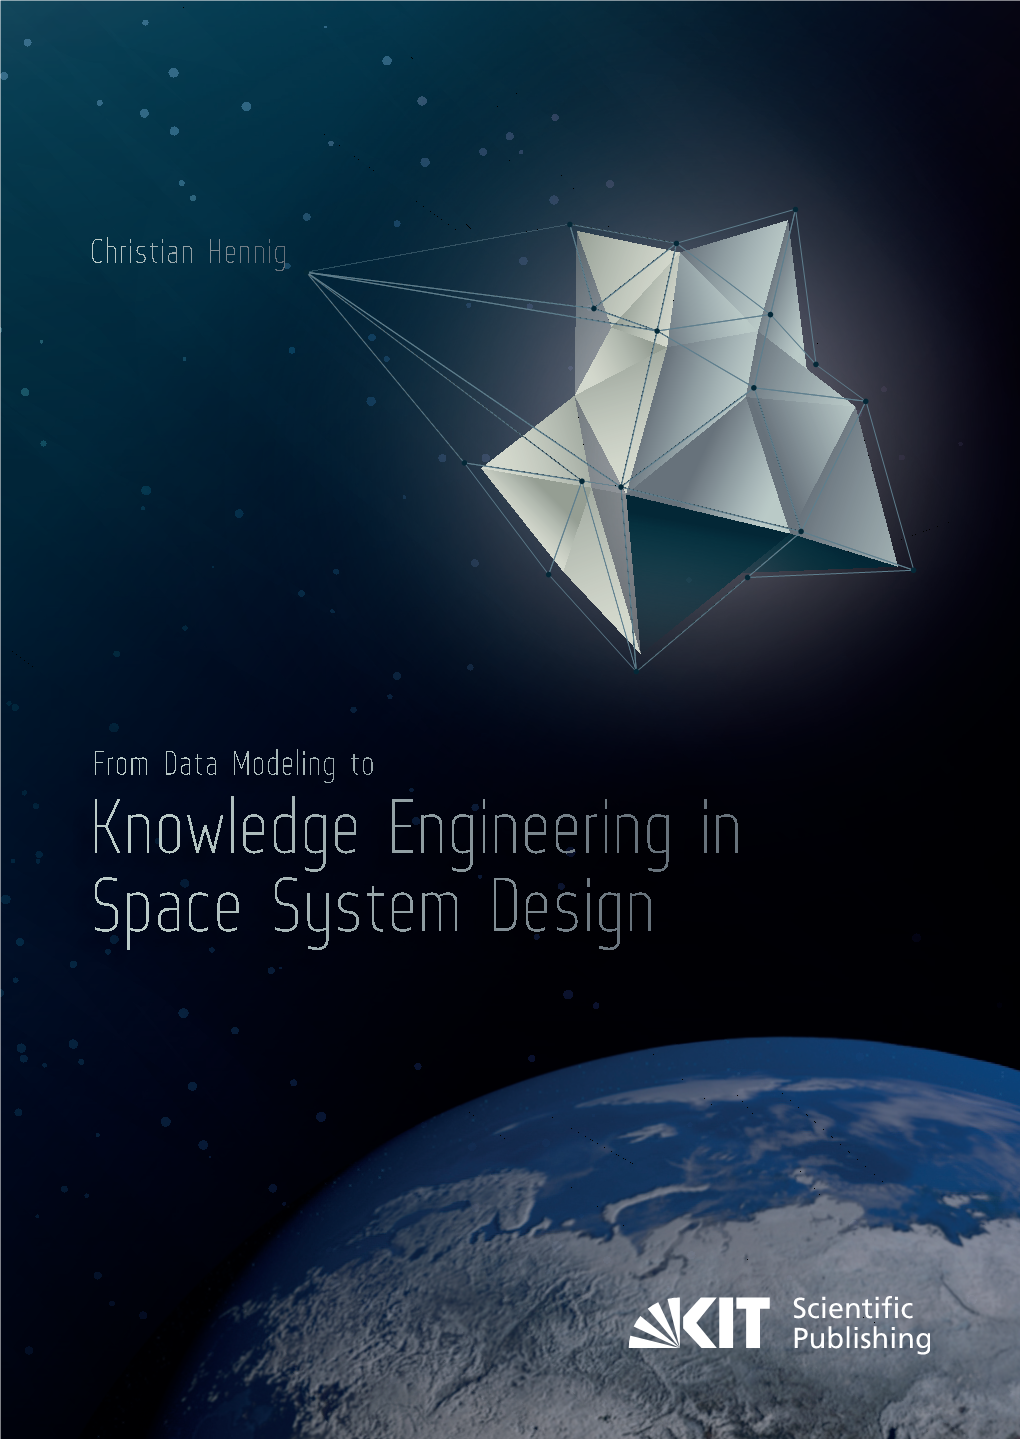 From Data Modeling to Knowledge Engineering in Space System Design